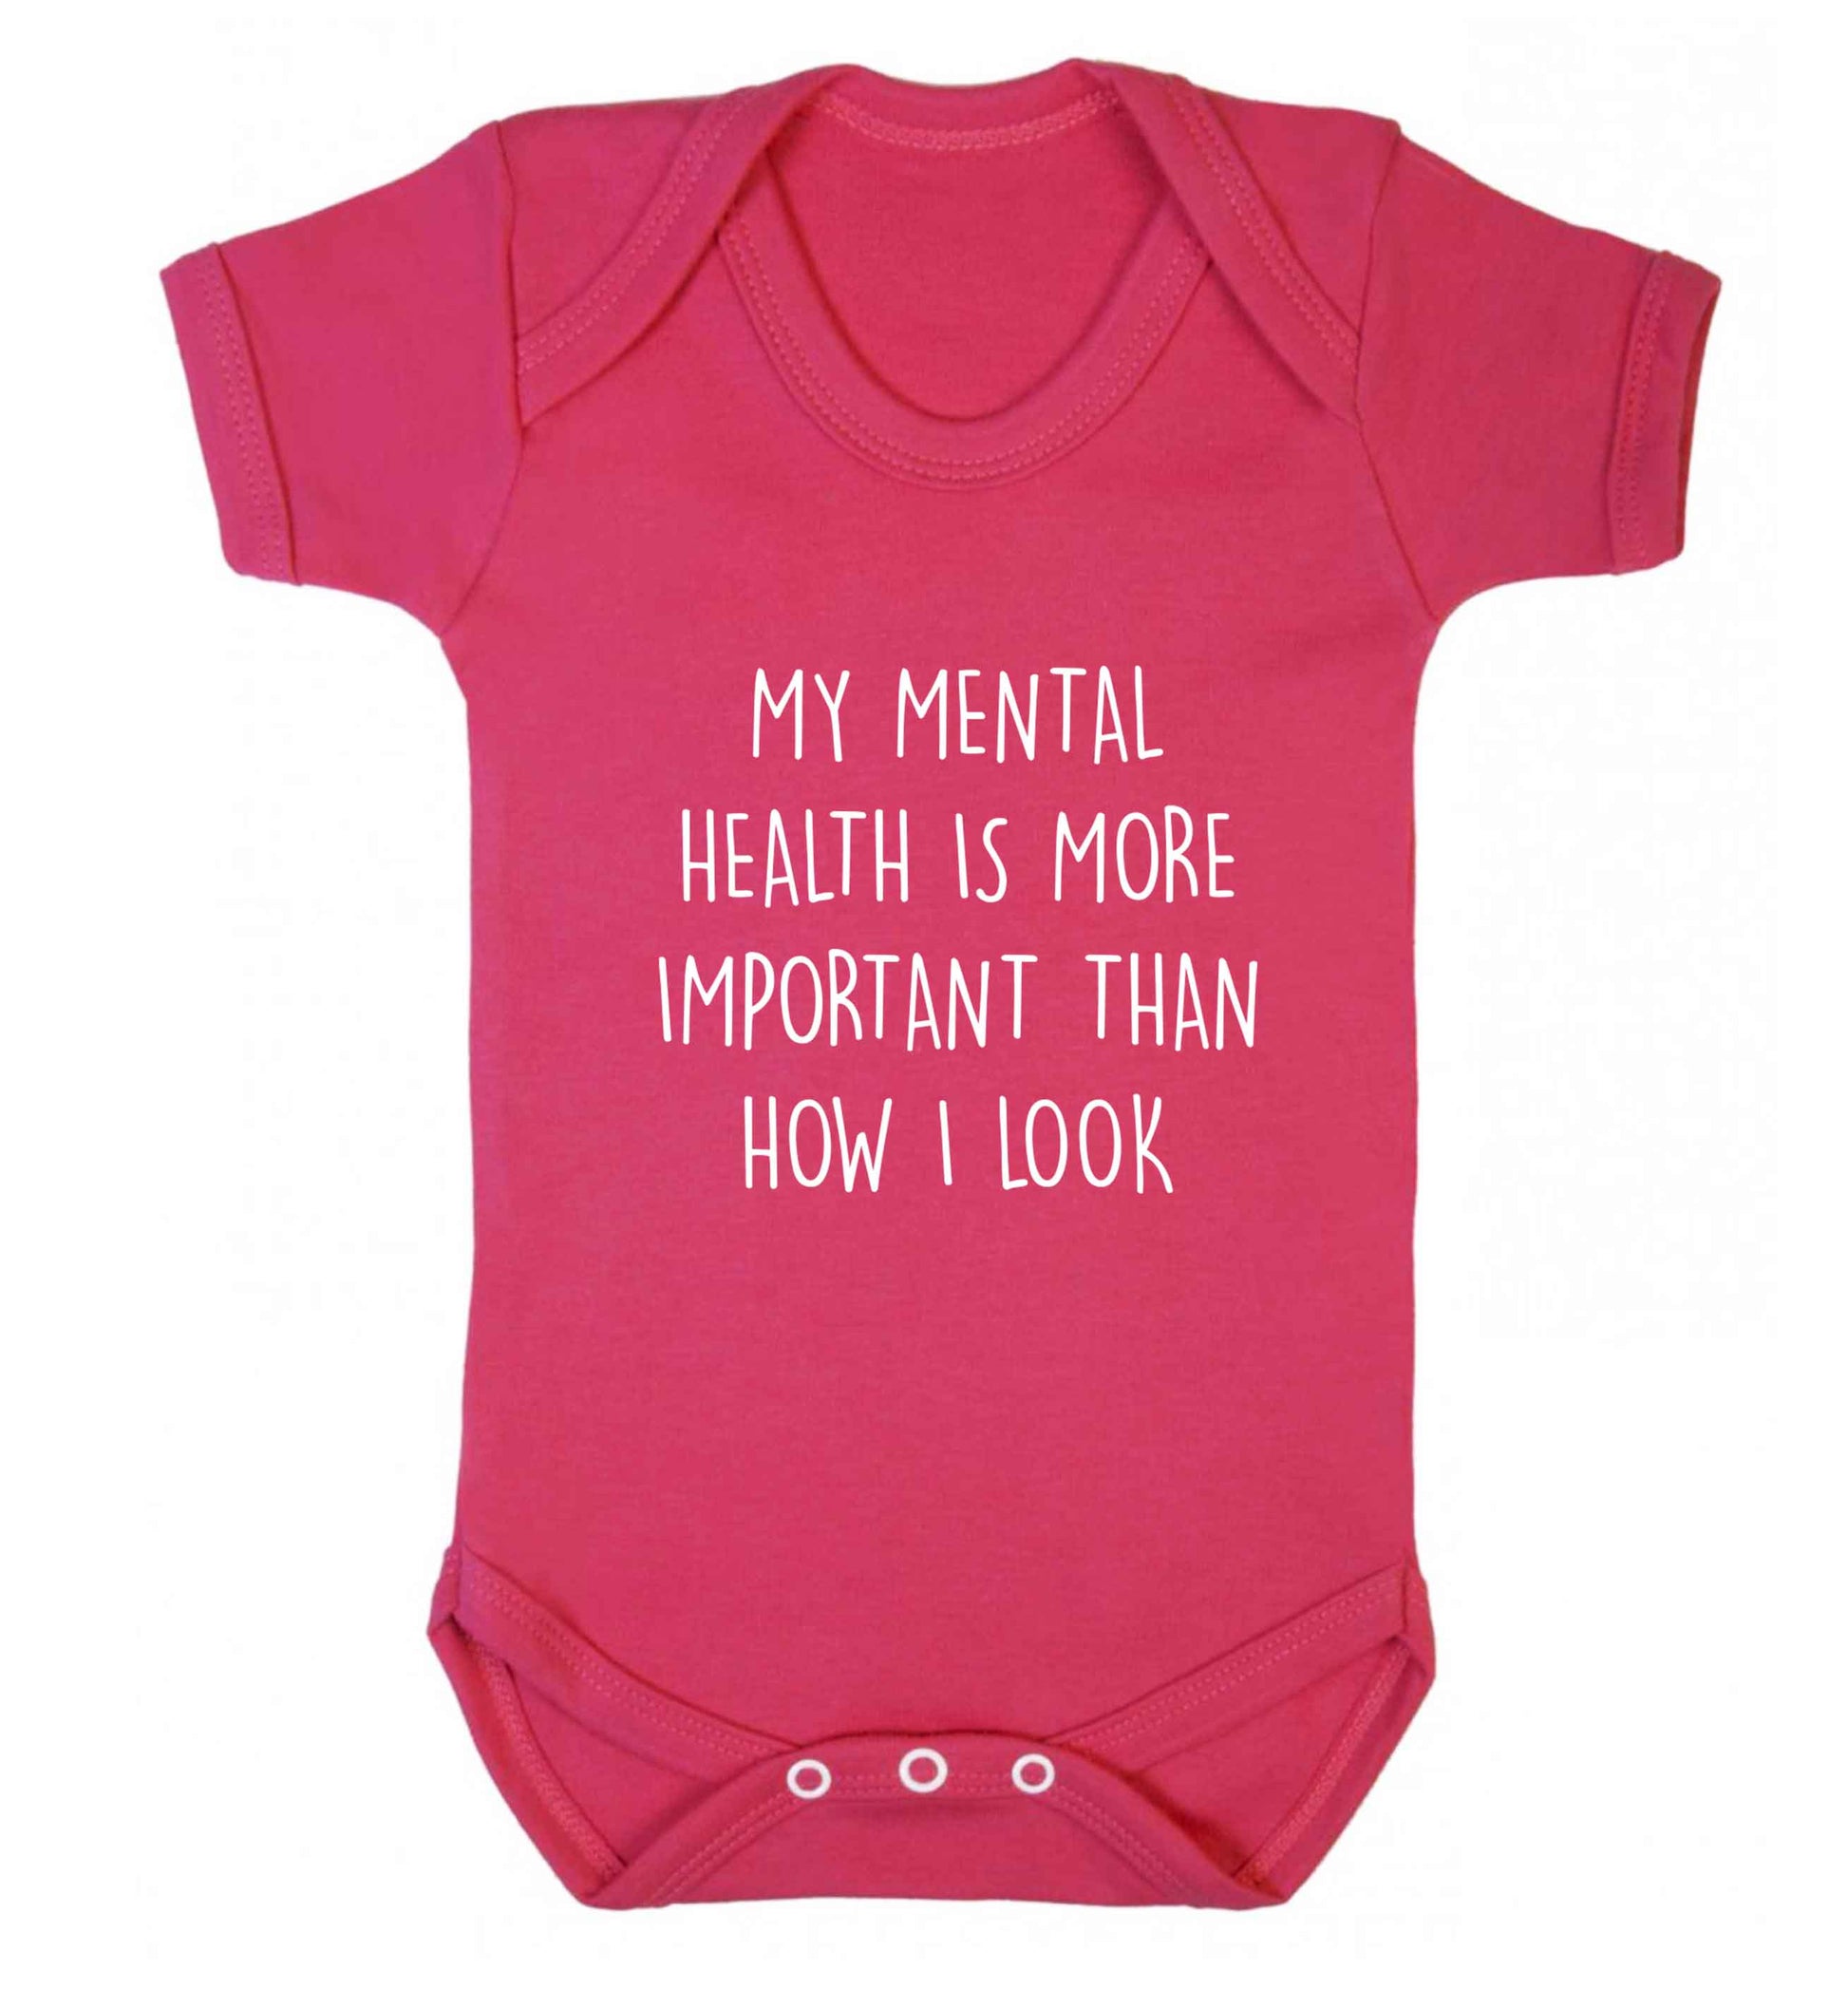 My mental health is more importnat than how I look baby vest dark pink 18-24 months